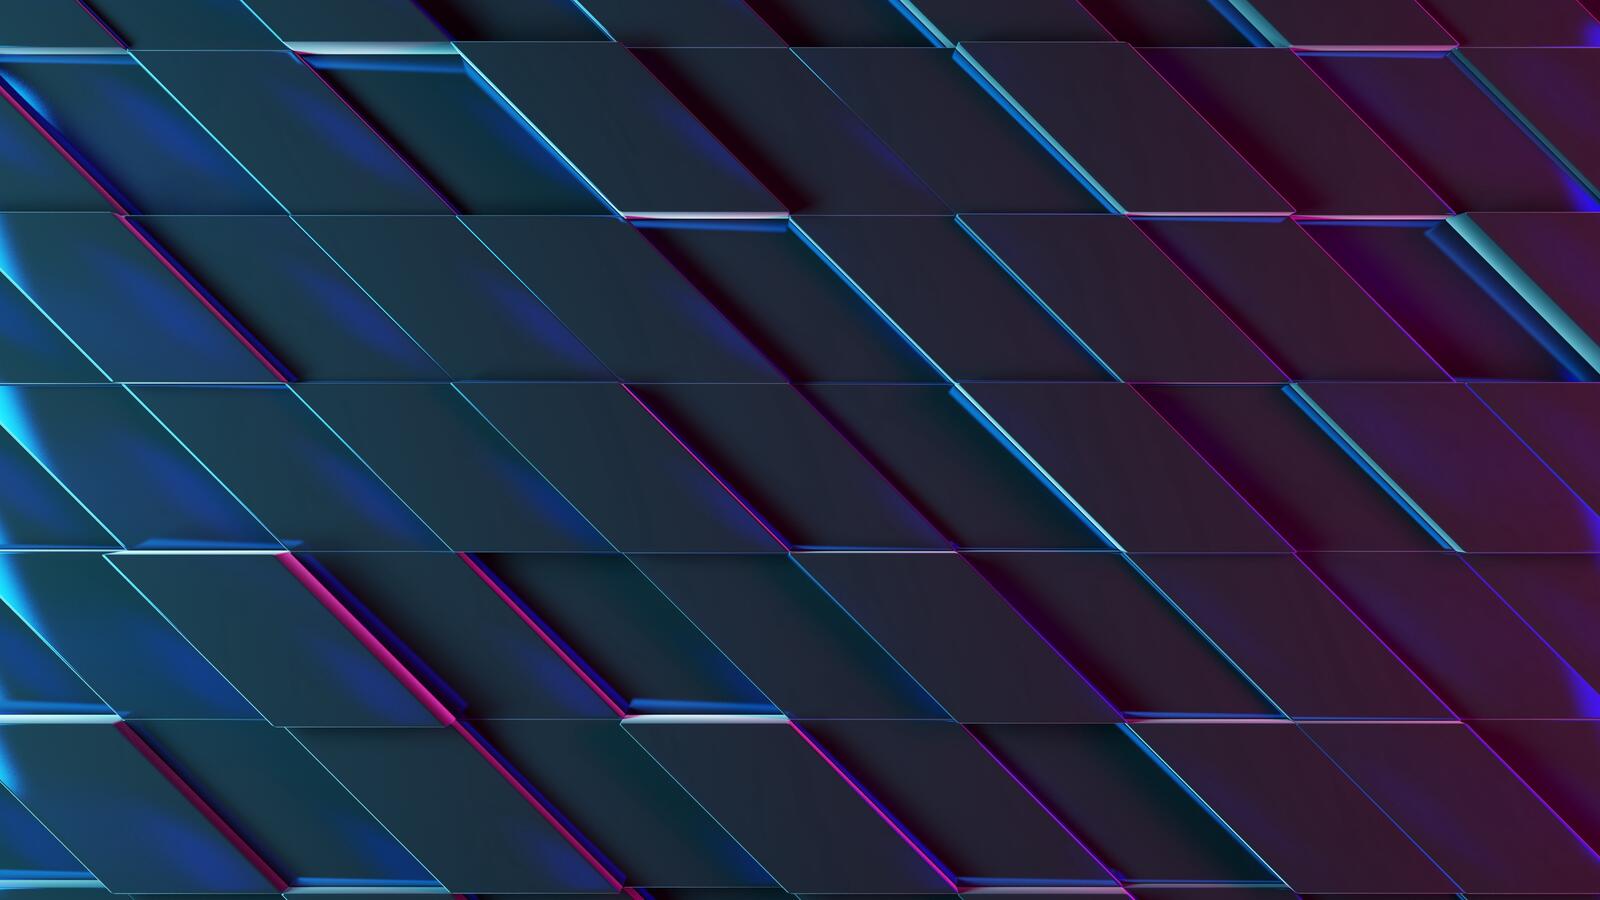 Wallpapers abstraction pattern rhombus on the desktop